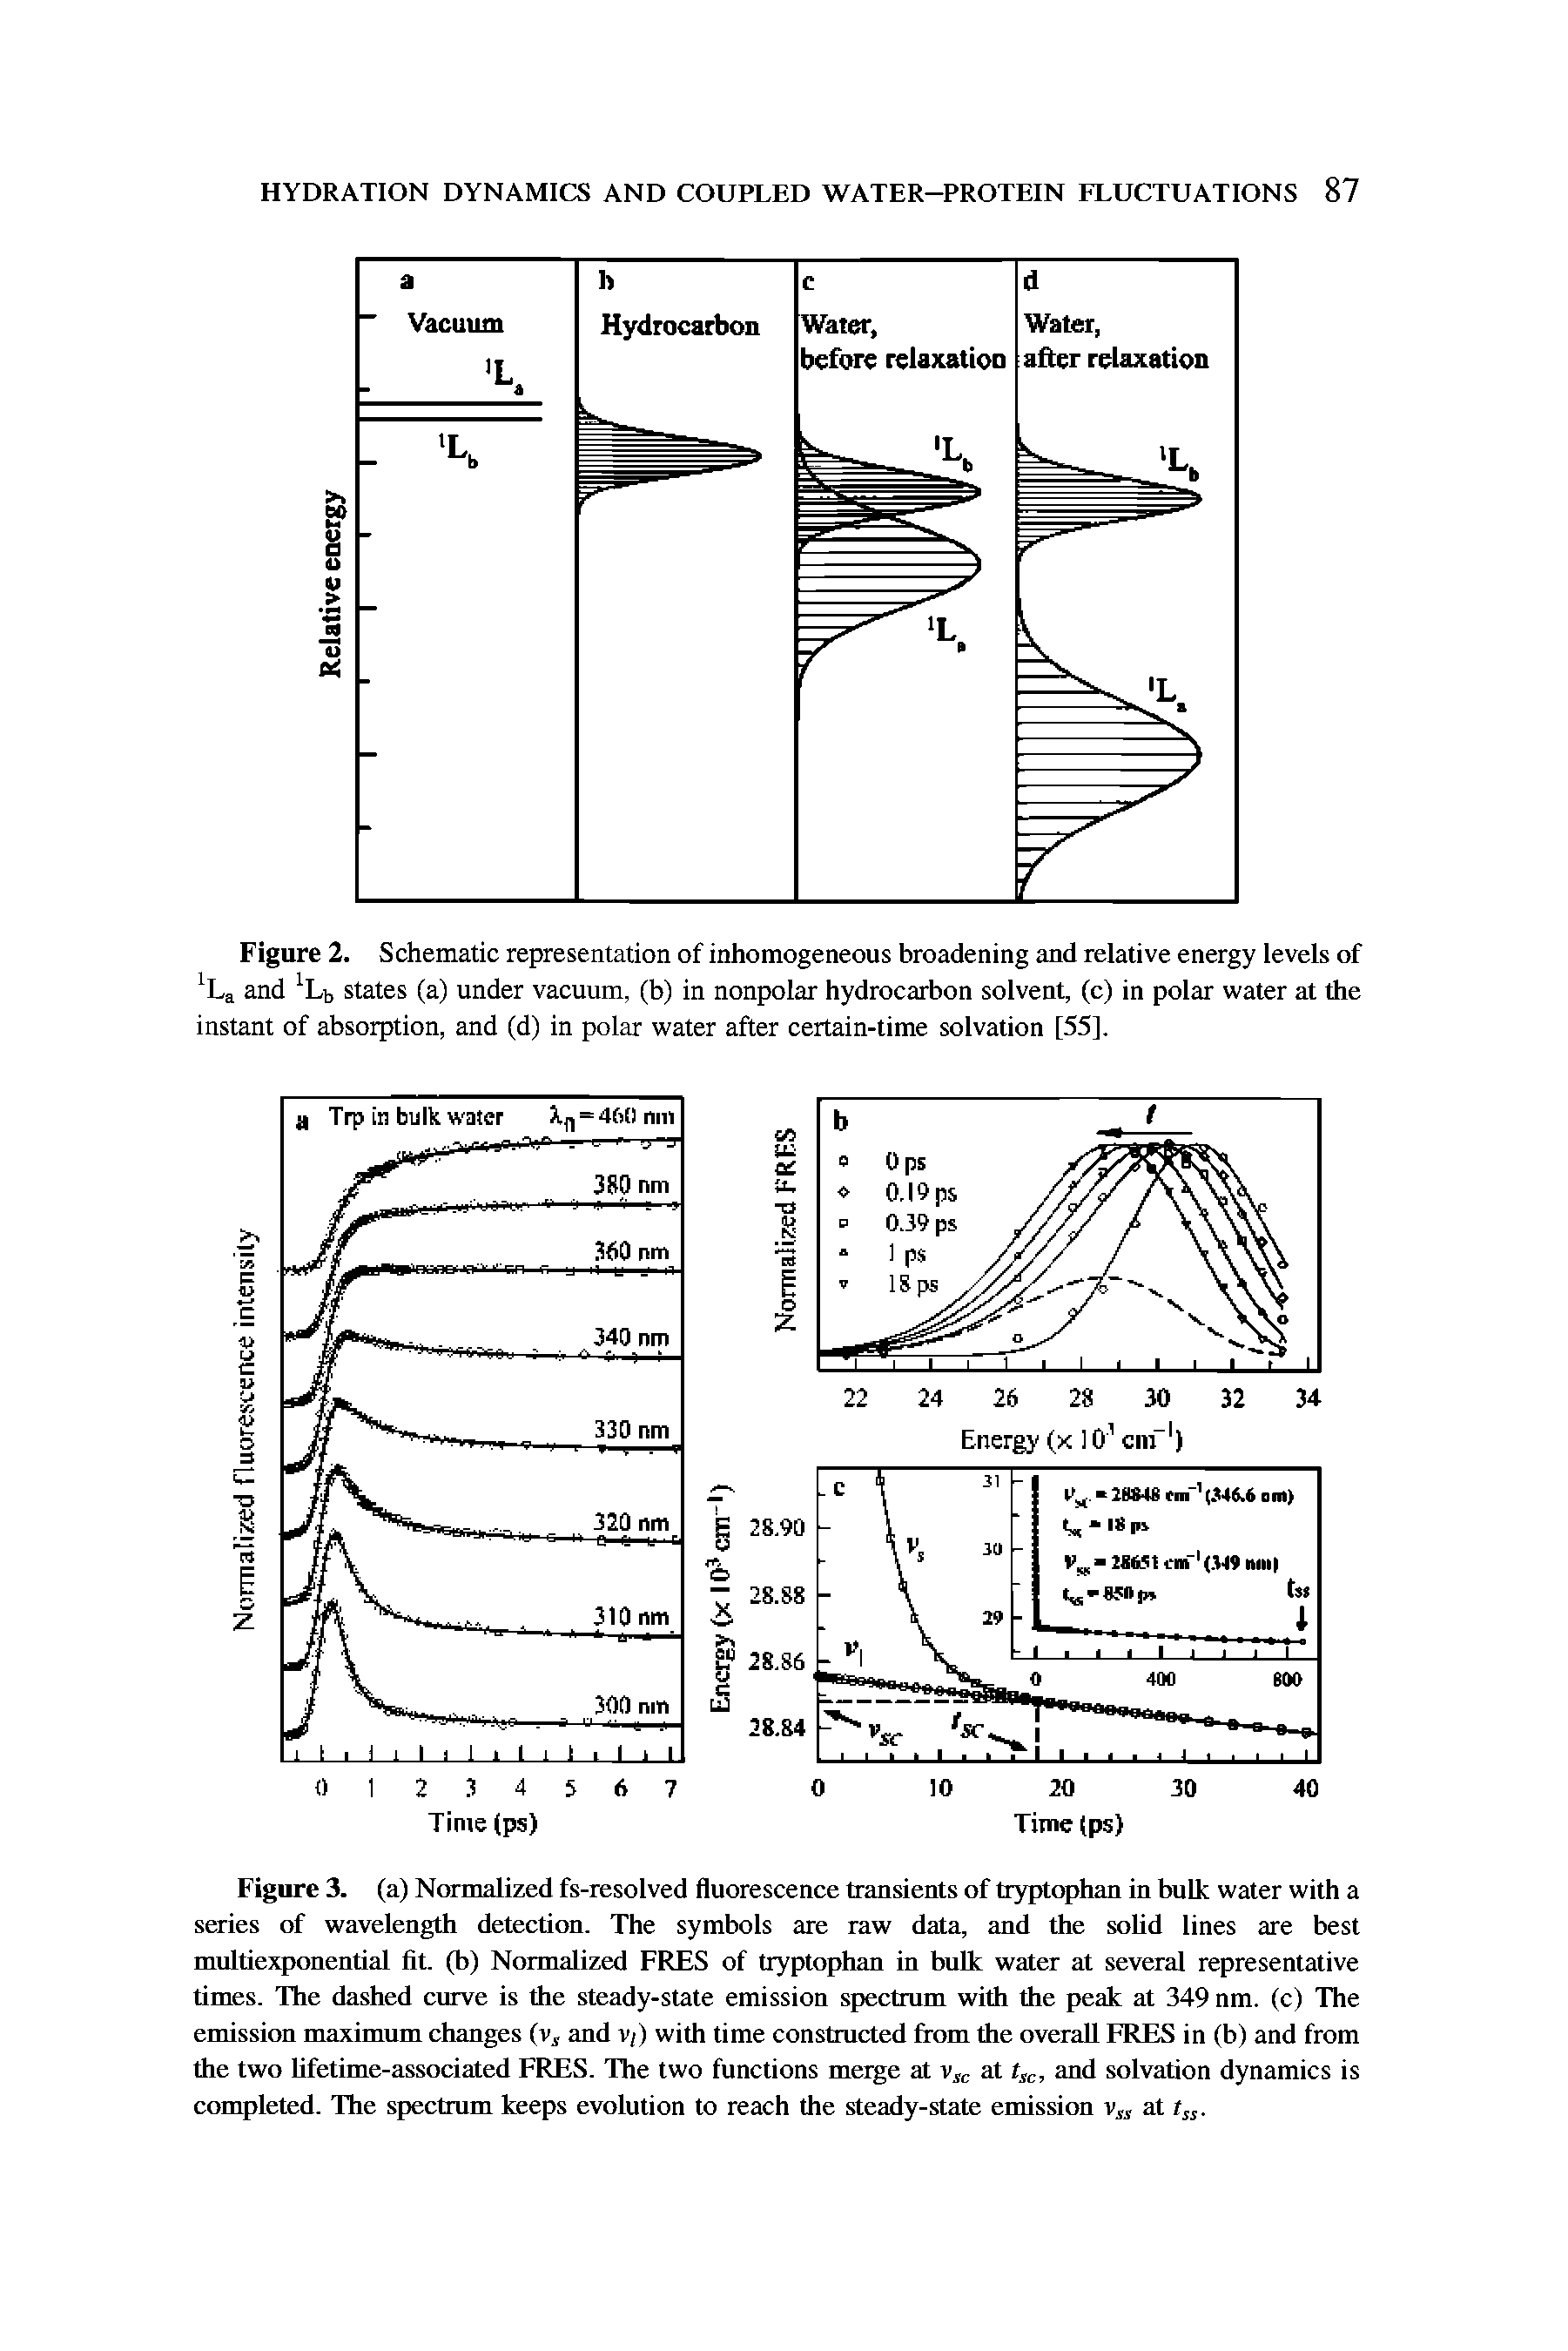 Figure 2. Schematic representation of inhomogeneous broadening and relative energy levels of and Lb states (a) under vacuum, (b) in nonpolar hydrocarbon solvent, (c) in polar water at the instant of absorption, and (d) in polar water after certain-time solvation [55],...